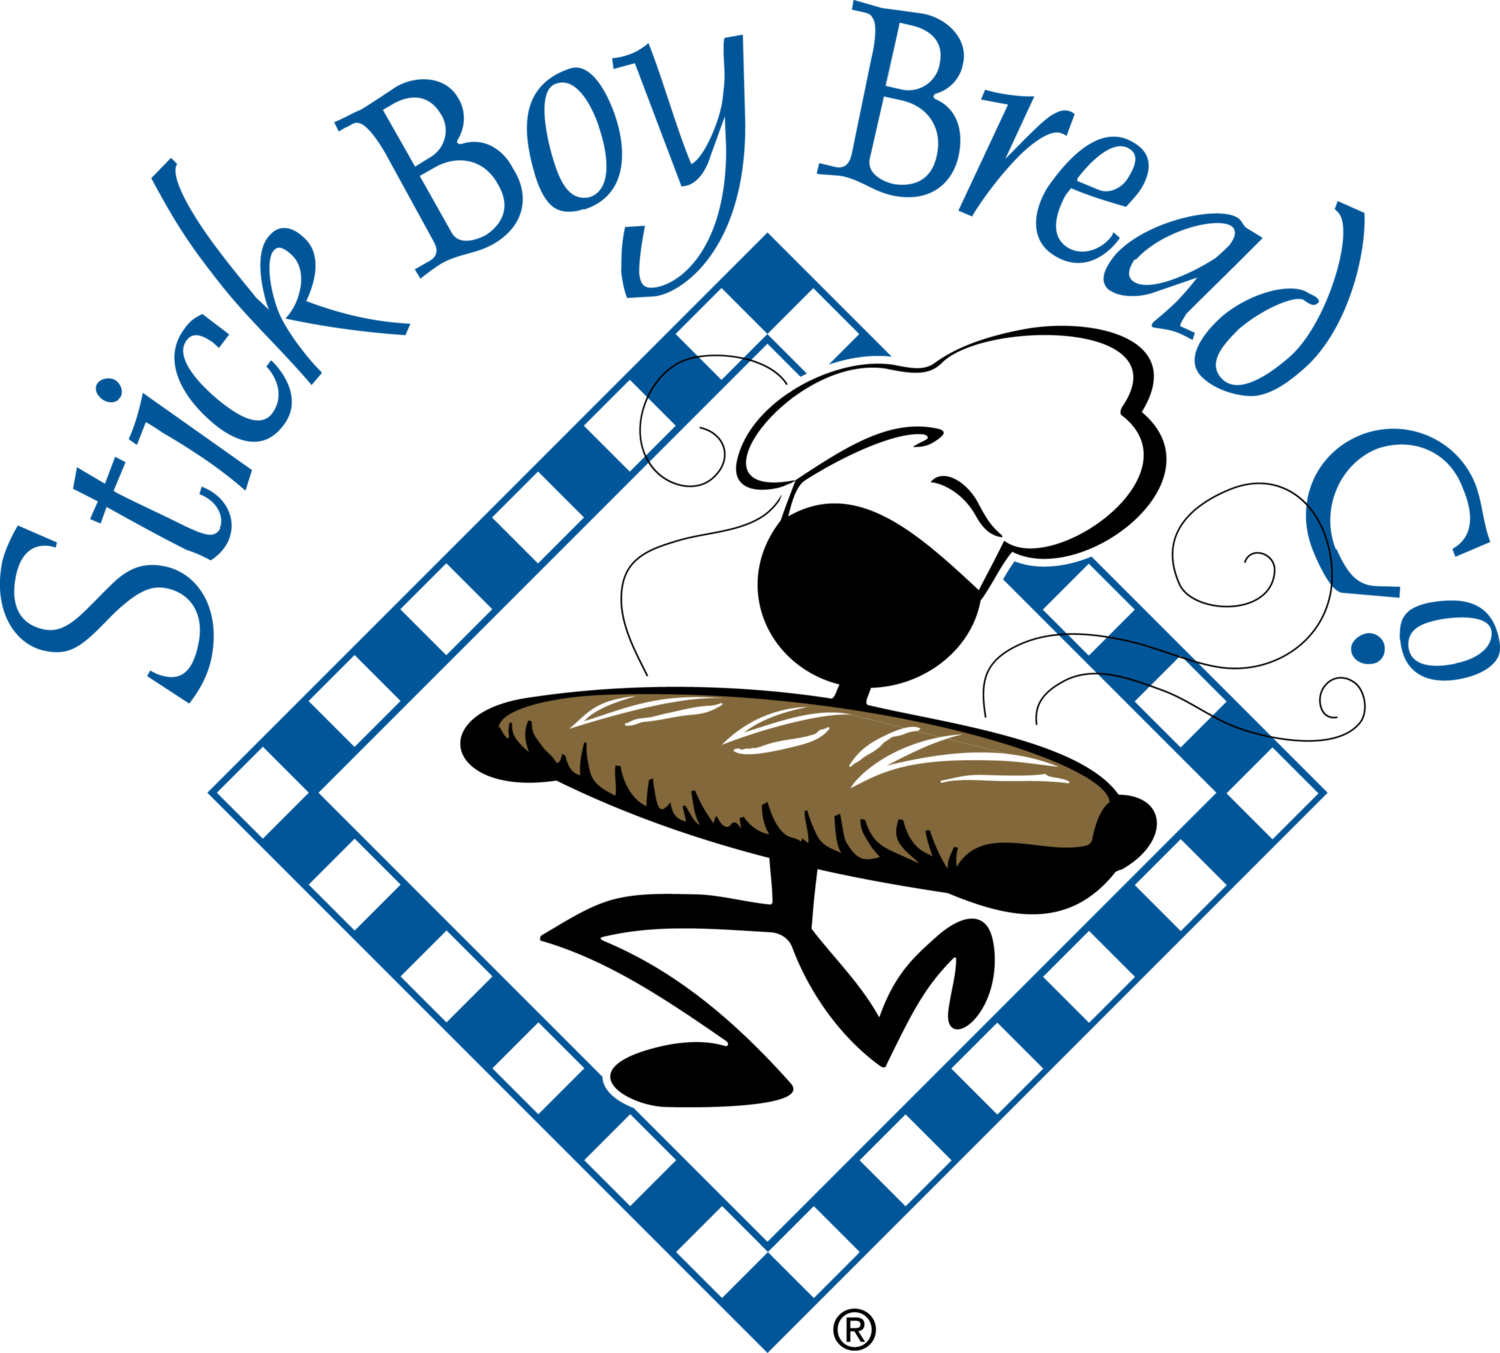 Donation Request Stick Boy Bread Company Png Library - Donation Request Stick Boy Bread Company Png Library (1500x1353)